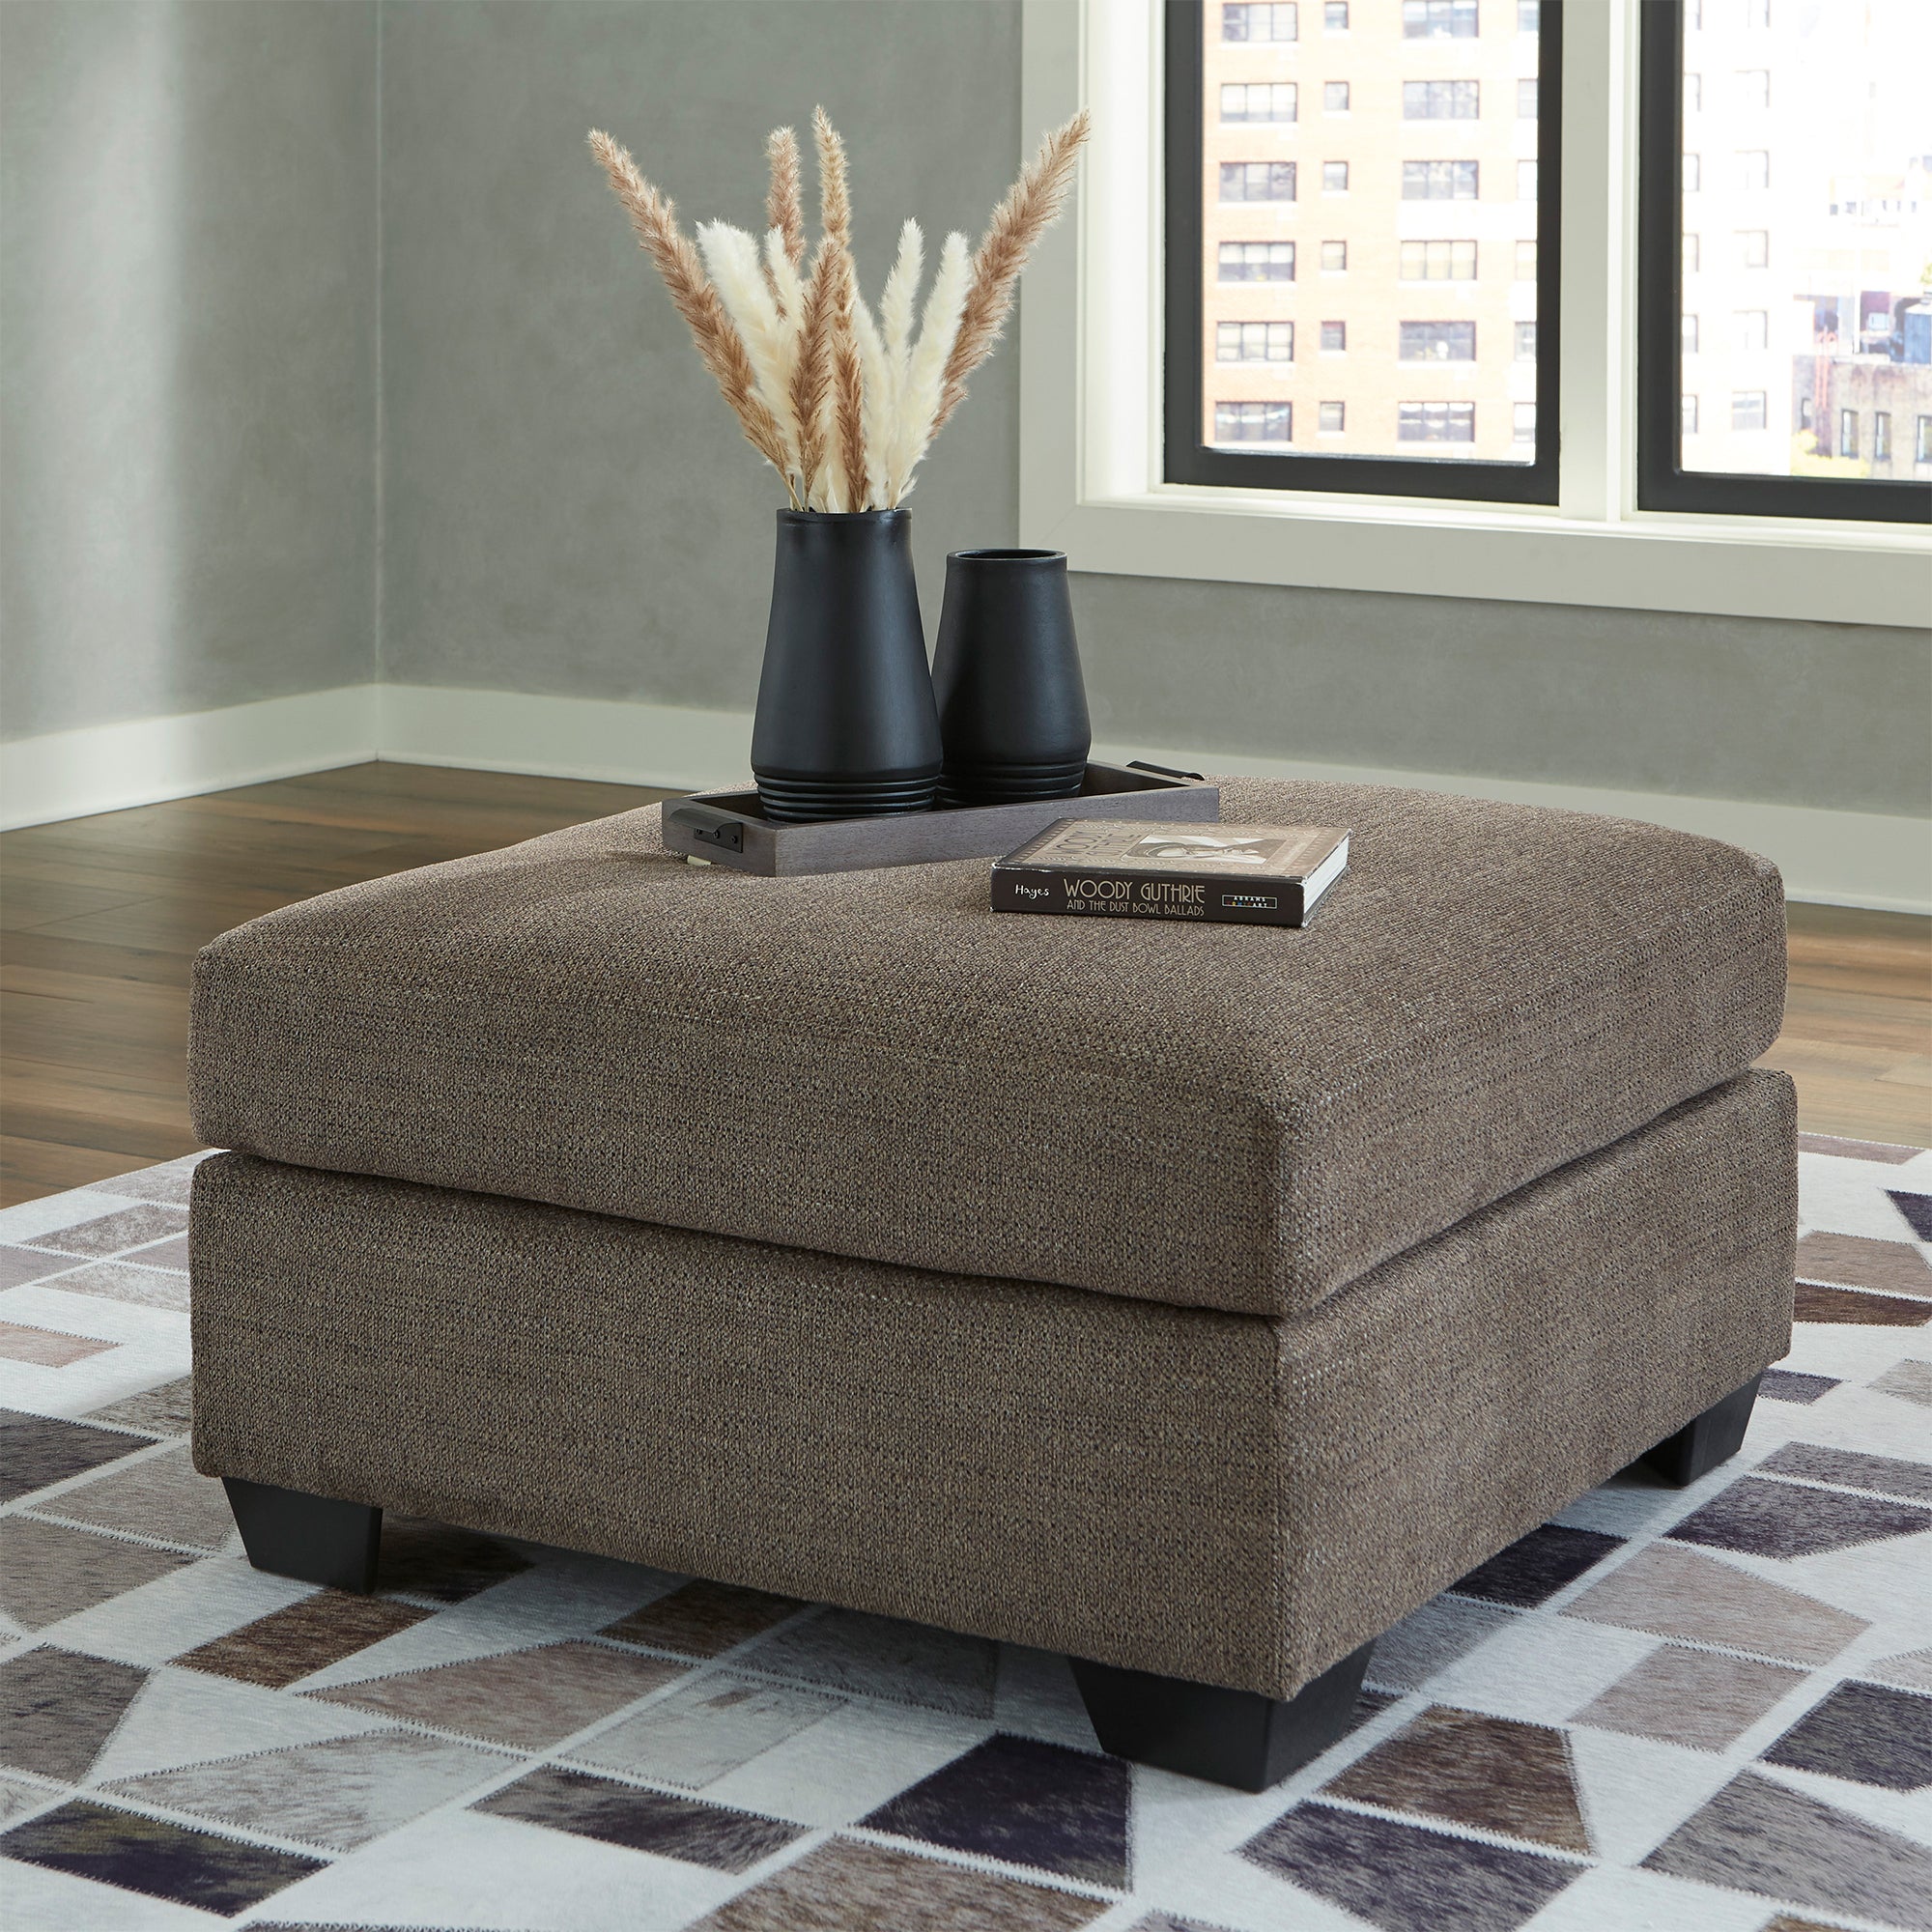 Elegant chocolate-colored Mahoney Oversized Accent Ottoman, ideal for extra seating or as a plush footrest